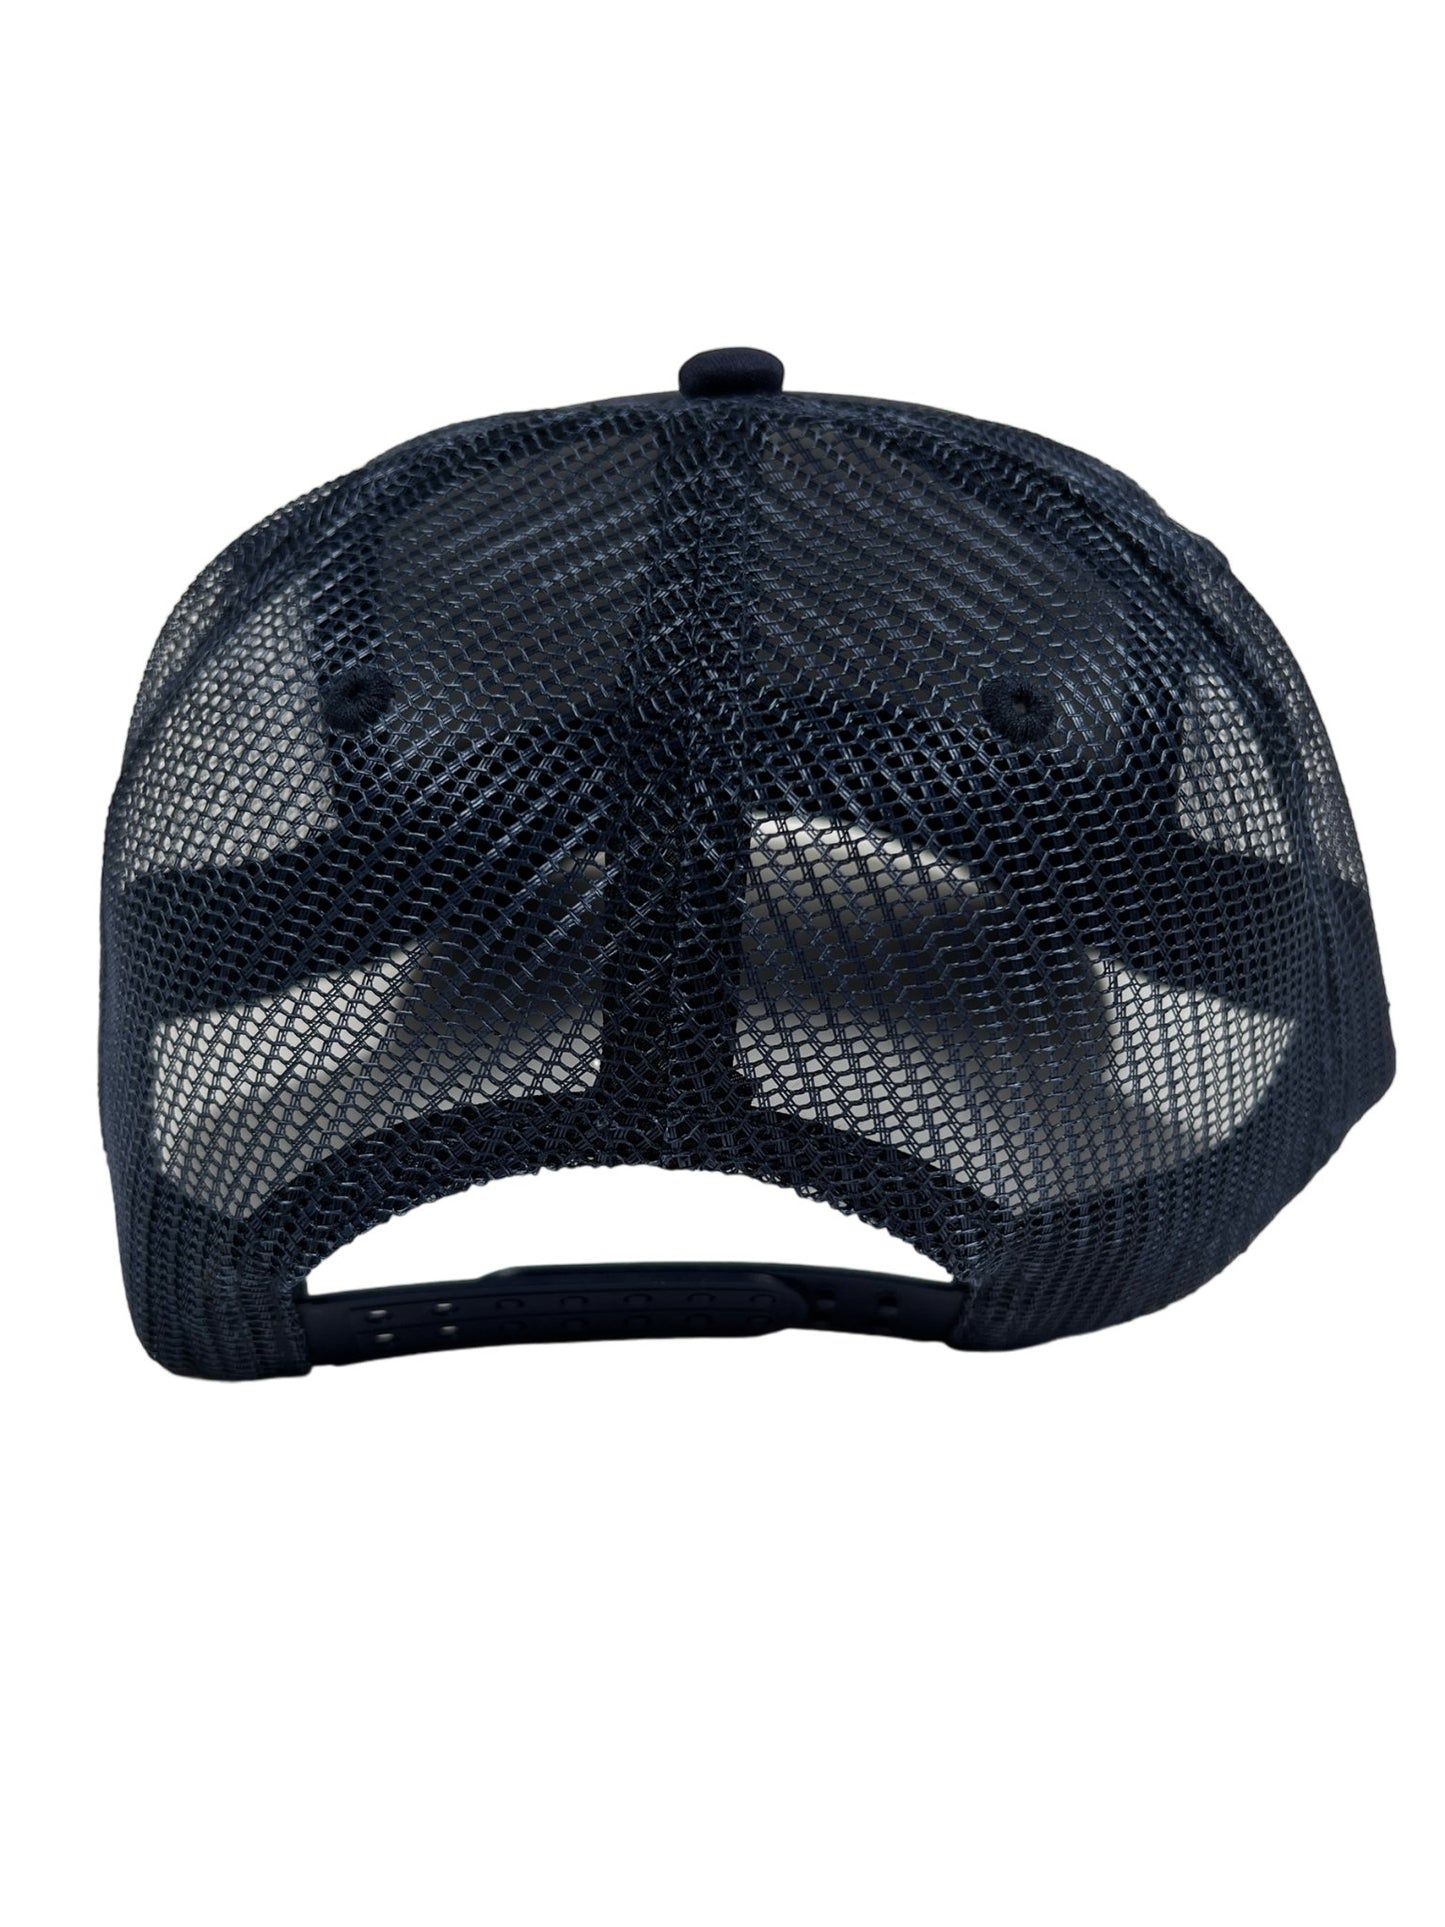 The back view of a PLEASURES navy nylon mesh trucker hat with an adjustable snapback.